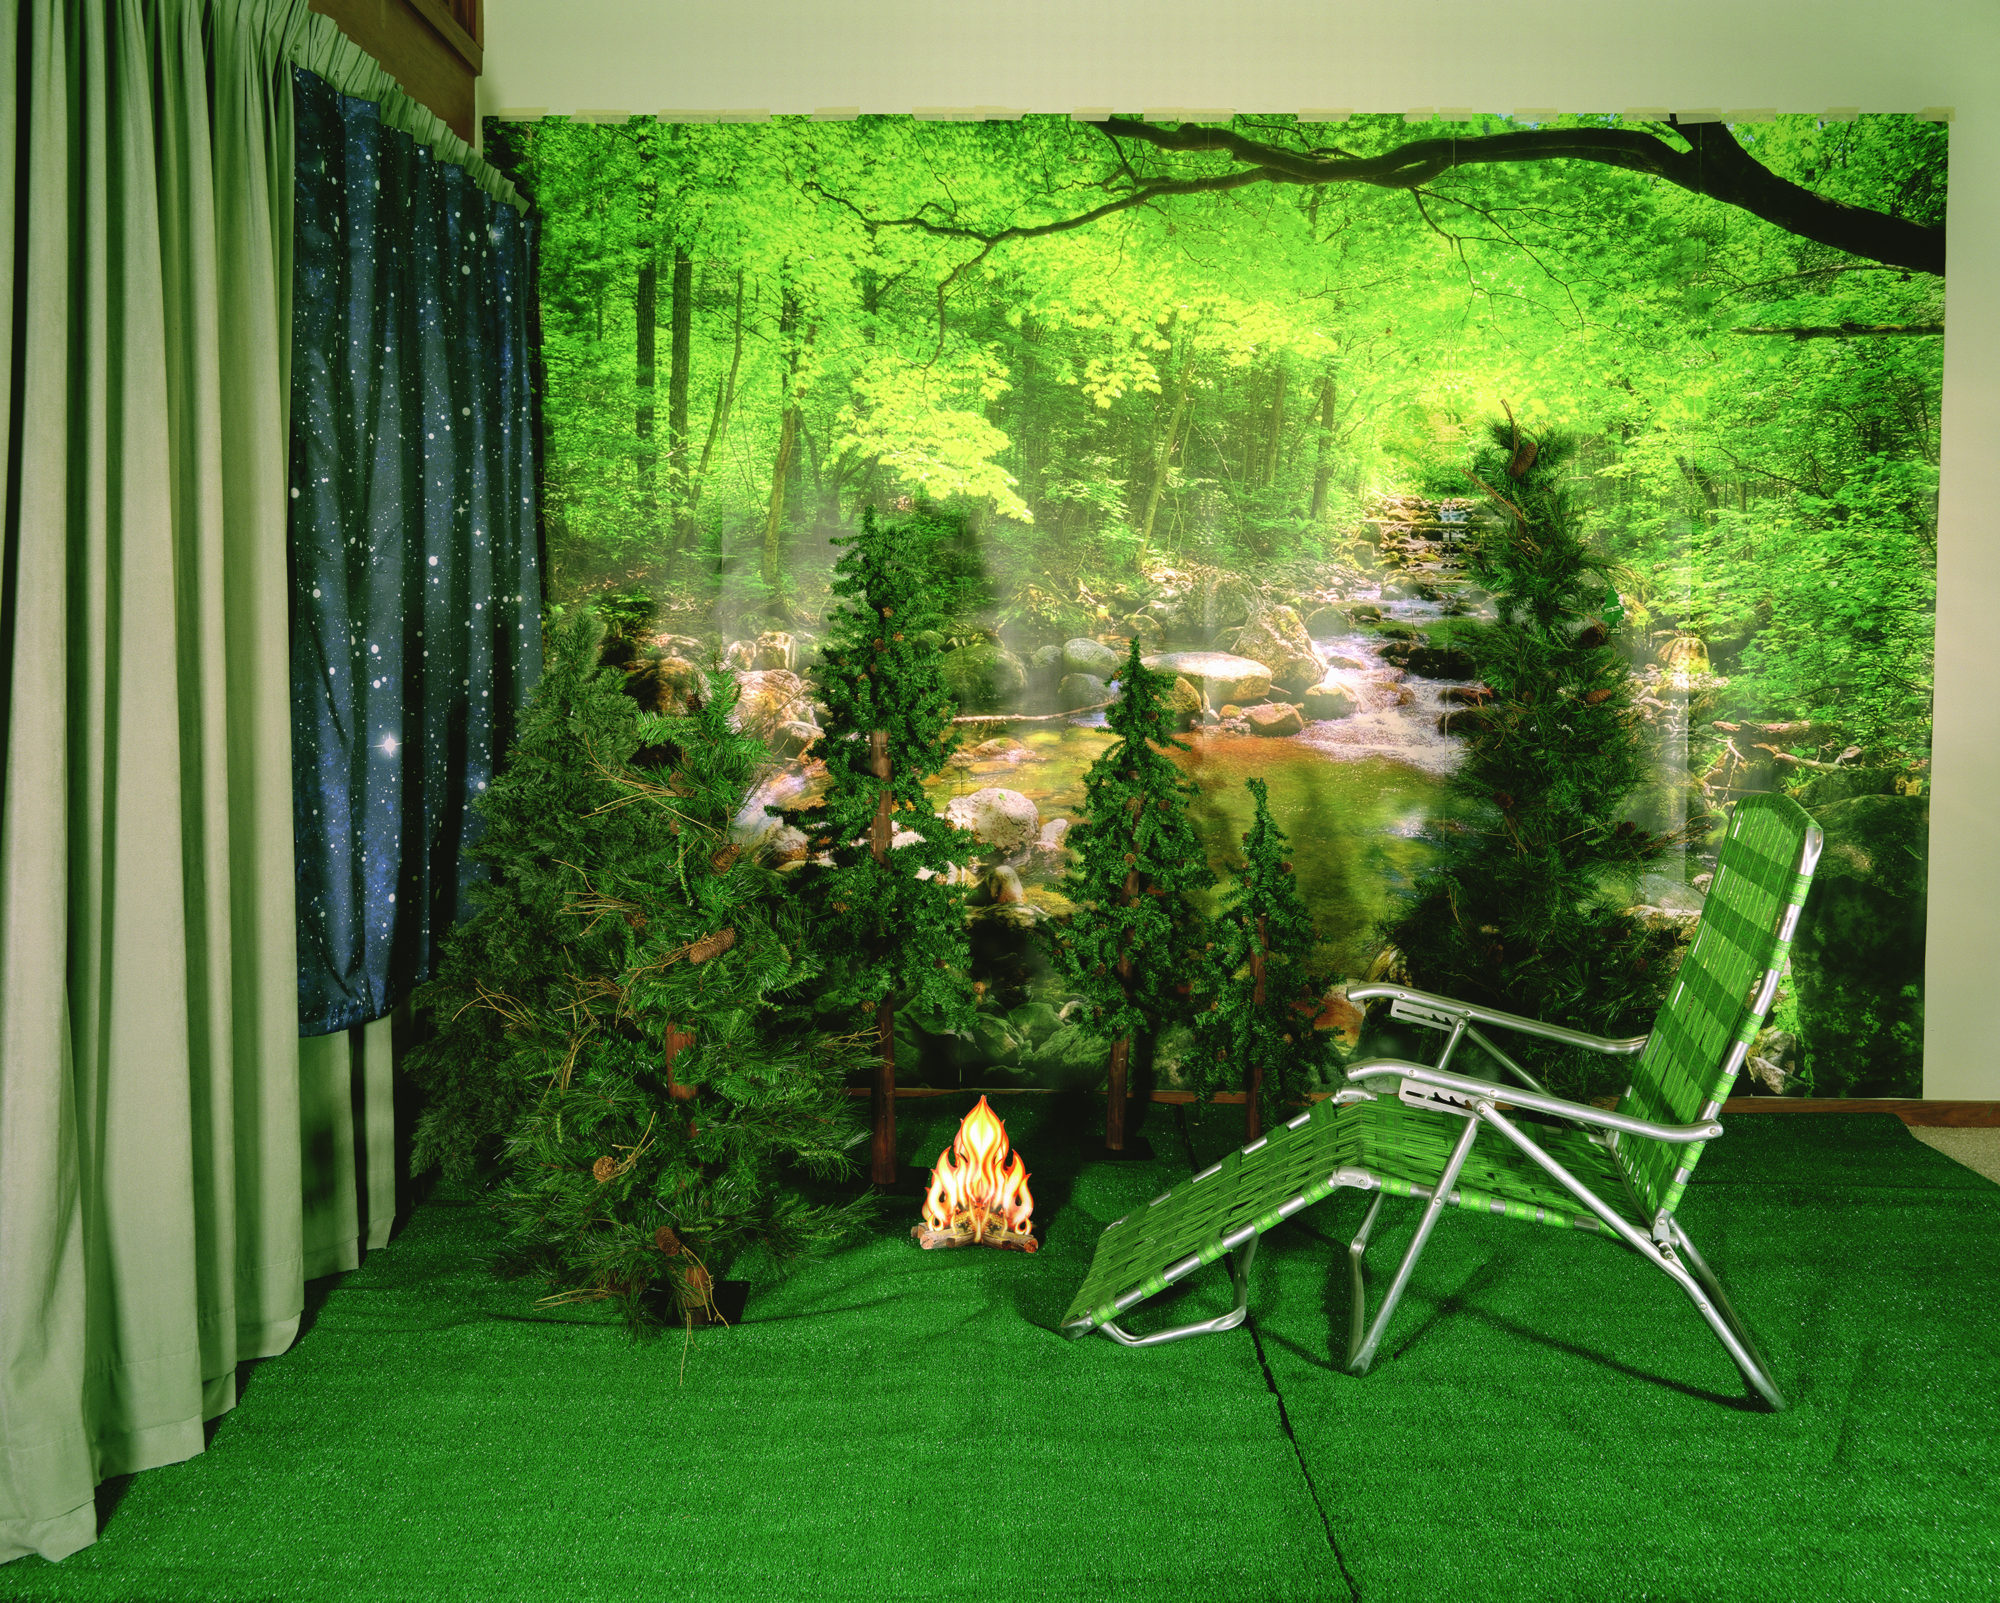 green lawn chair in a room of green items